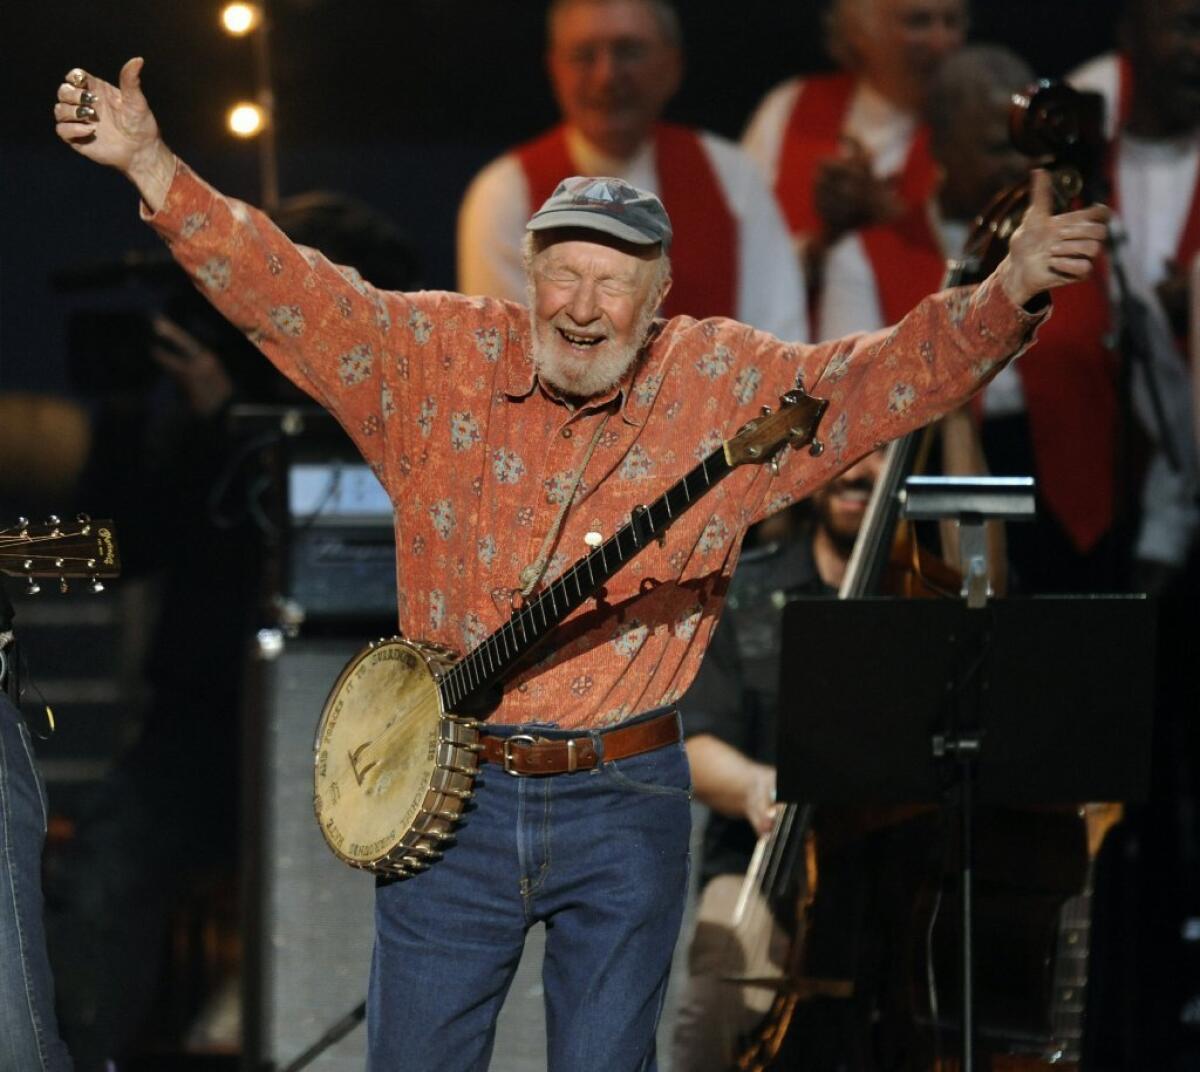 Folk legend Pete Seeger died at the age of 94.